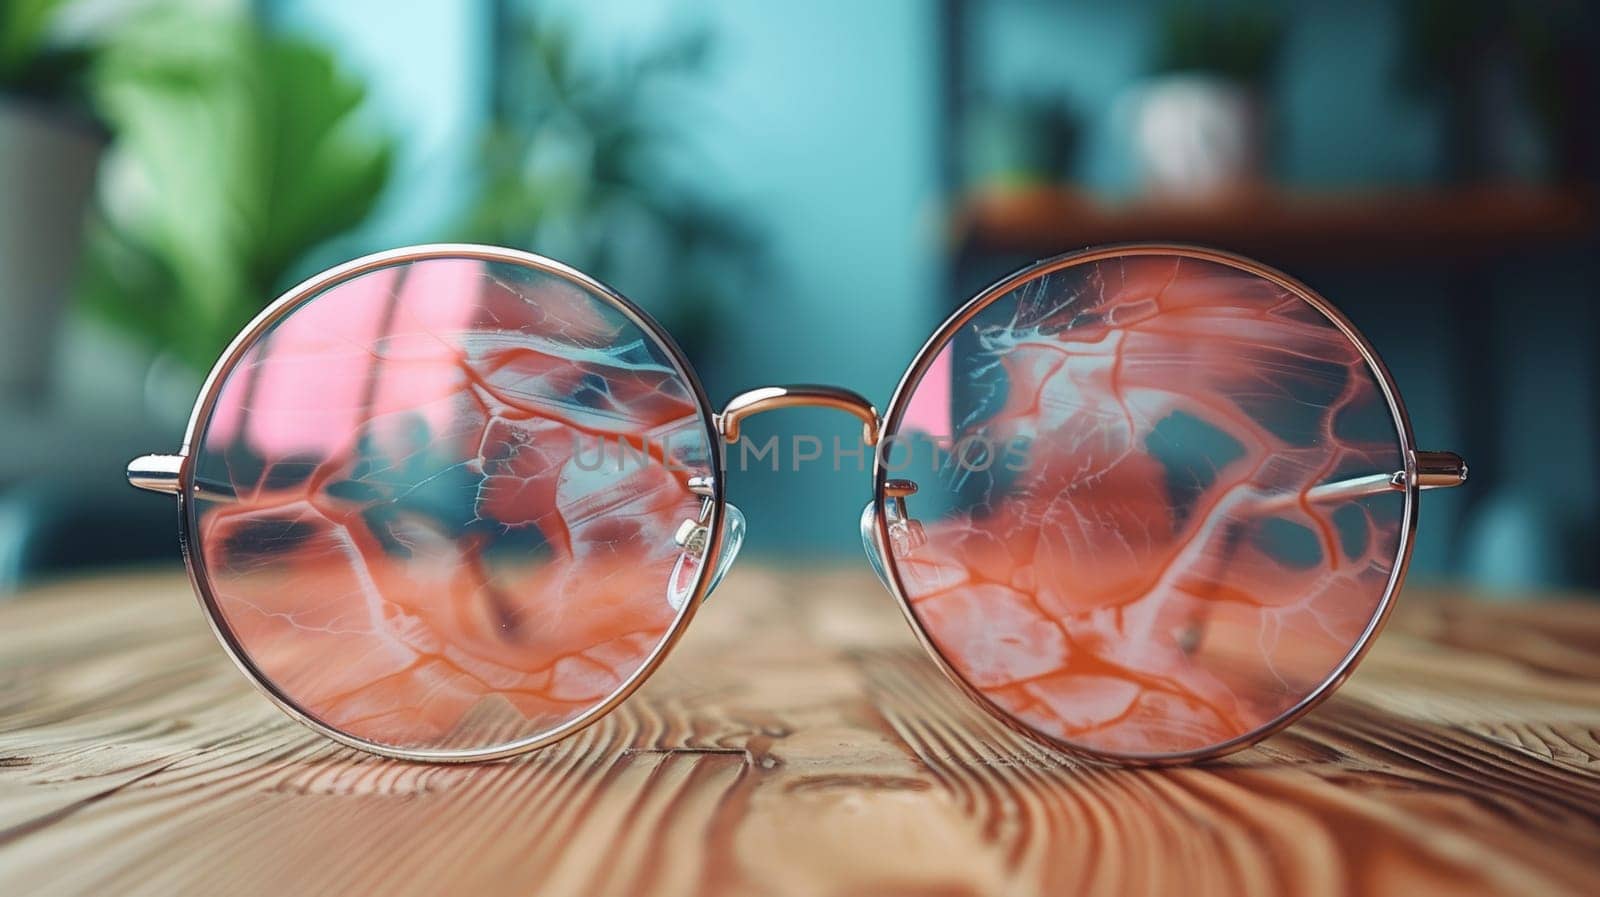 A pair of glasses with pink and orange colors on a wooden table